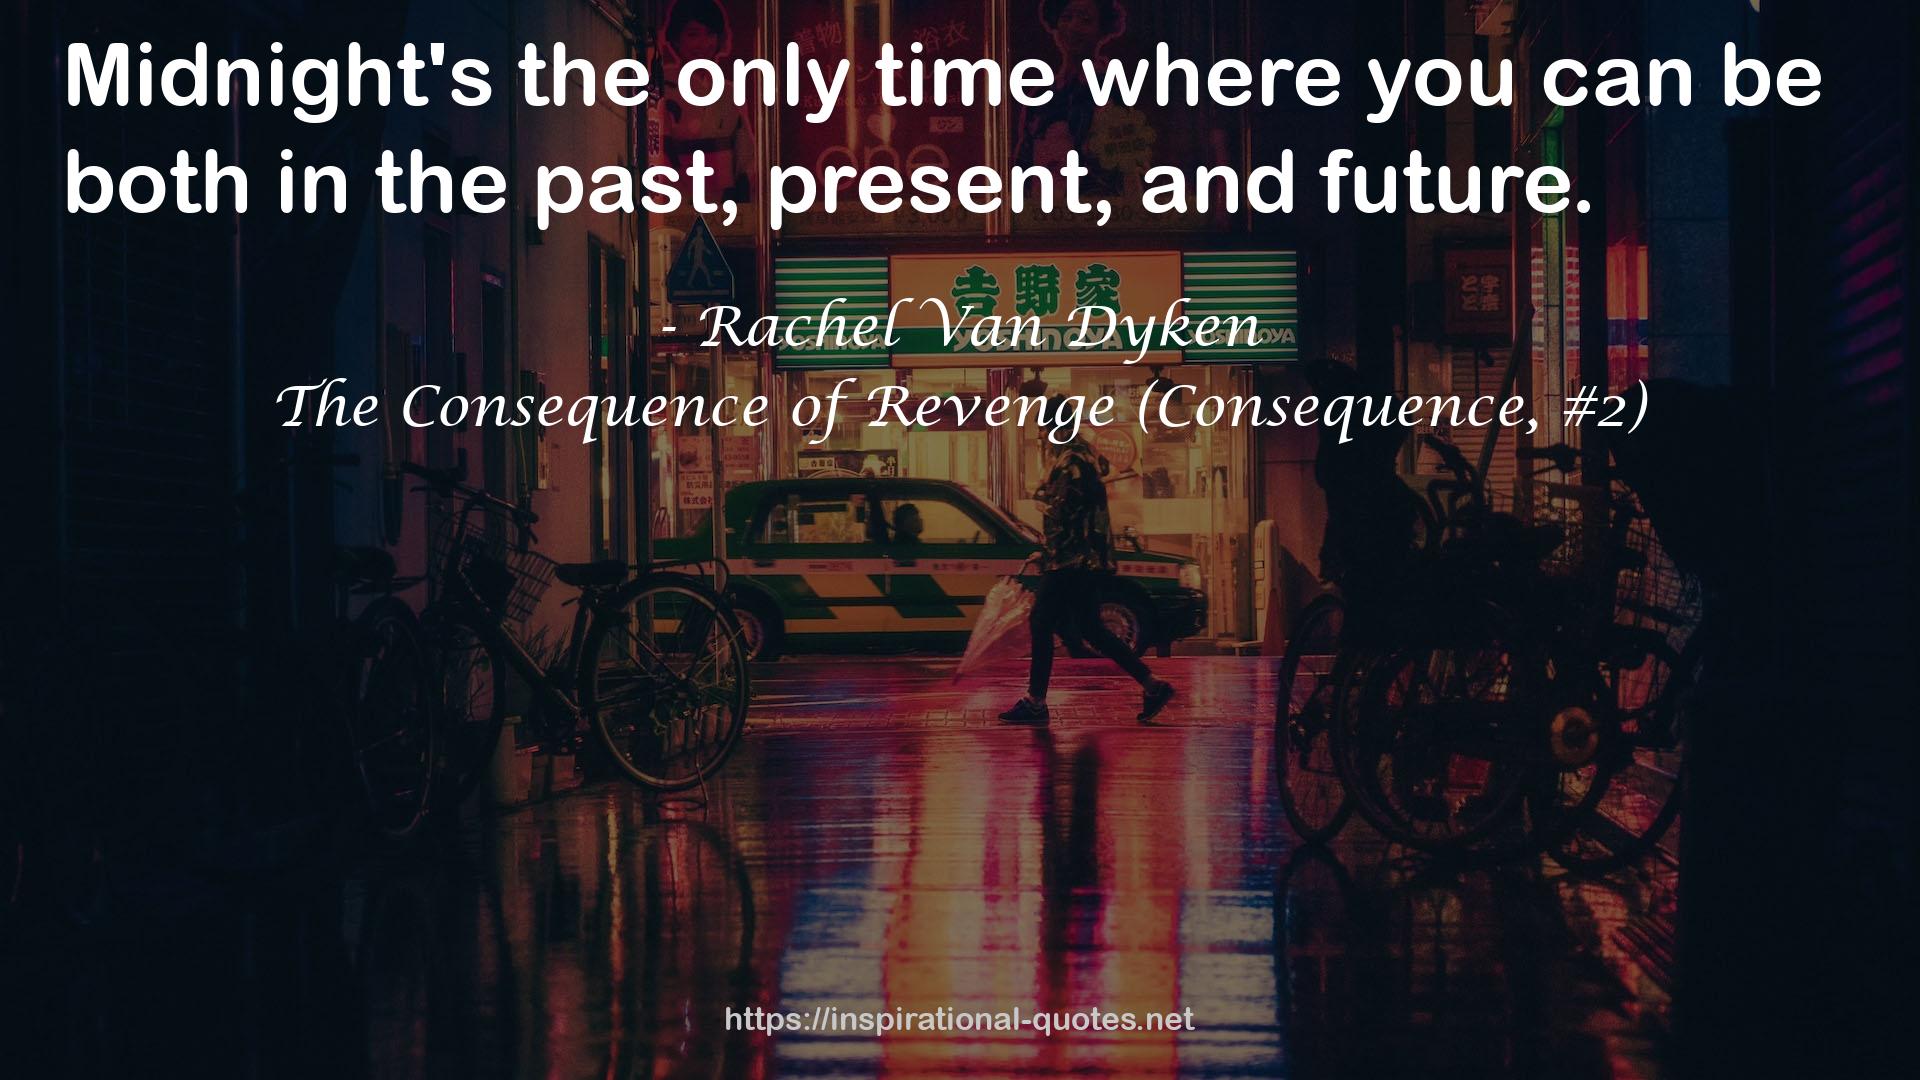 The Consequence of Revenge (Consequence, #2) QUOTES